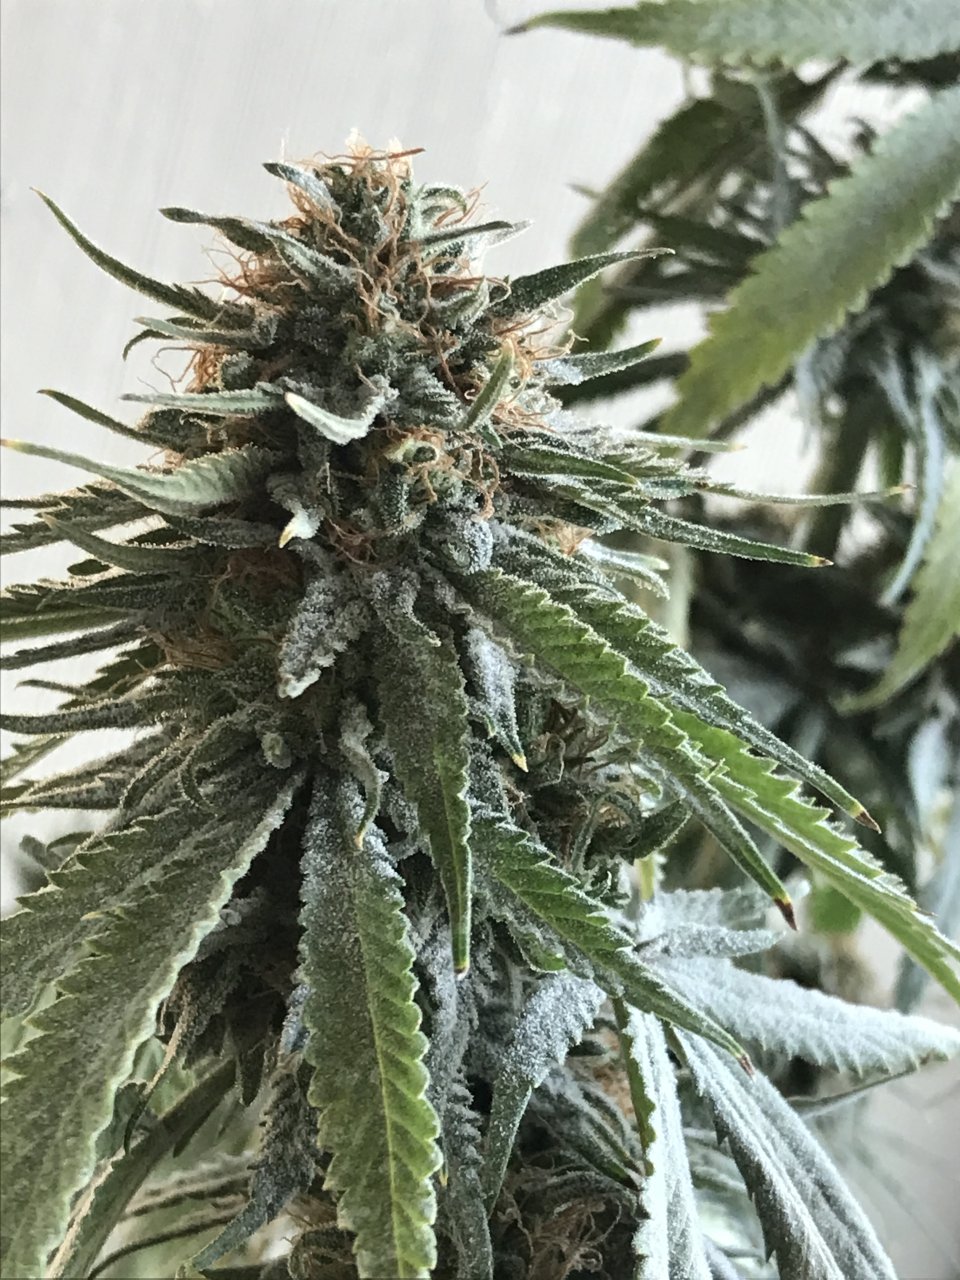 Girl Scout Cookies (Gina)-Day 39F-h.JPG